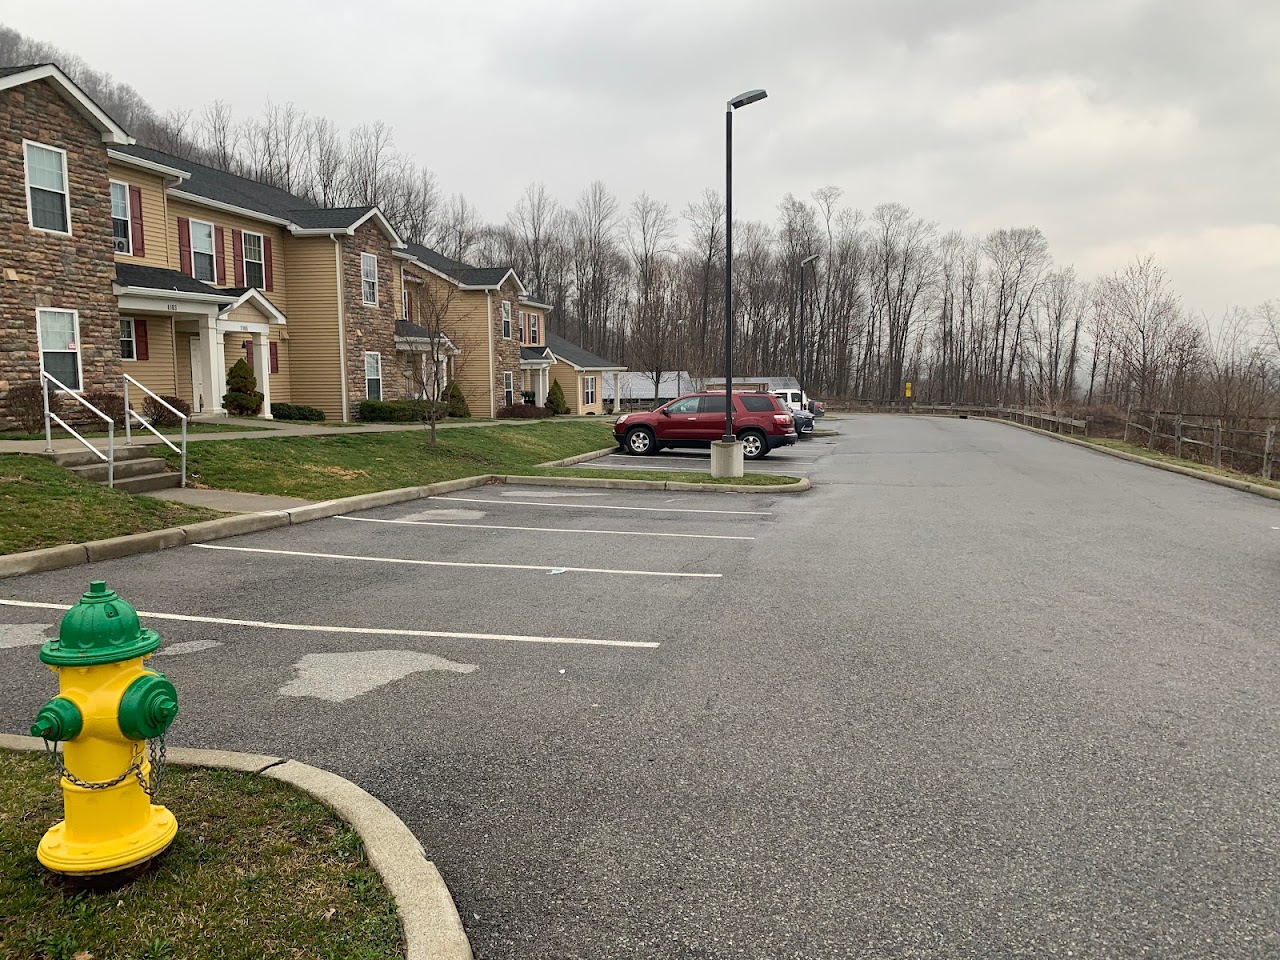 Photo of MASON'S RIDGE. Affordable housing located at 30 SNAKE HILL RD NEW WINDSOR, NY 